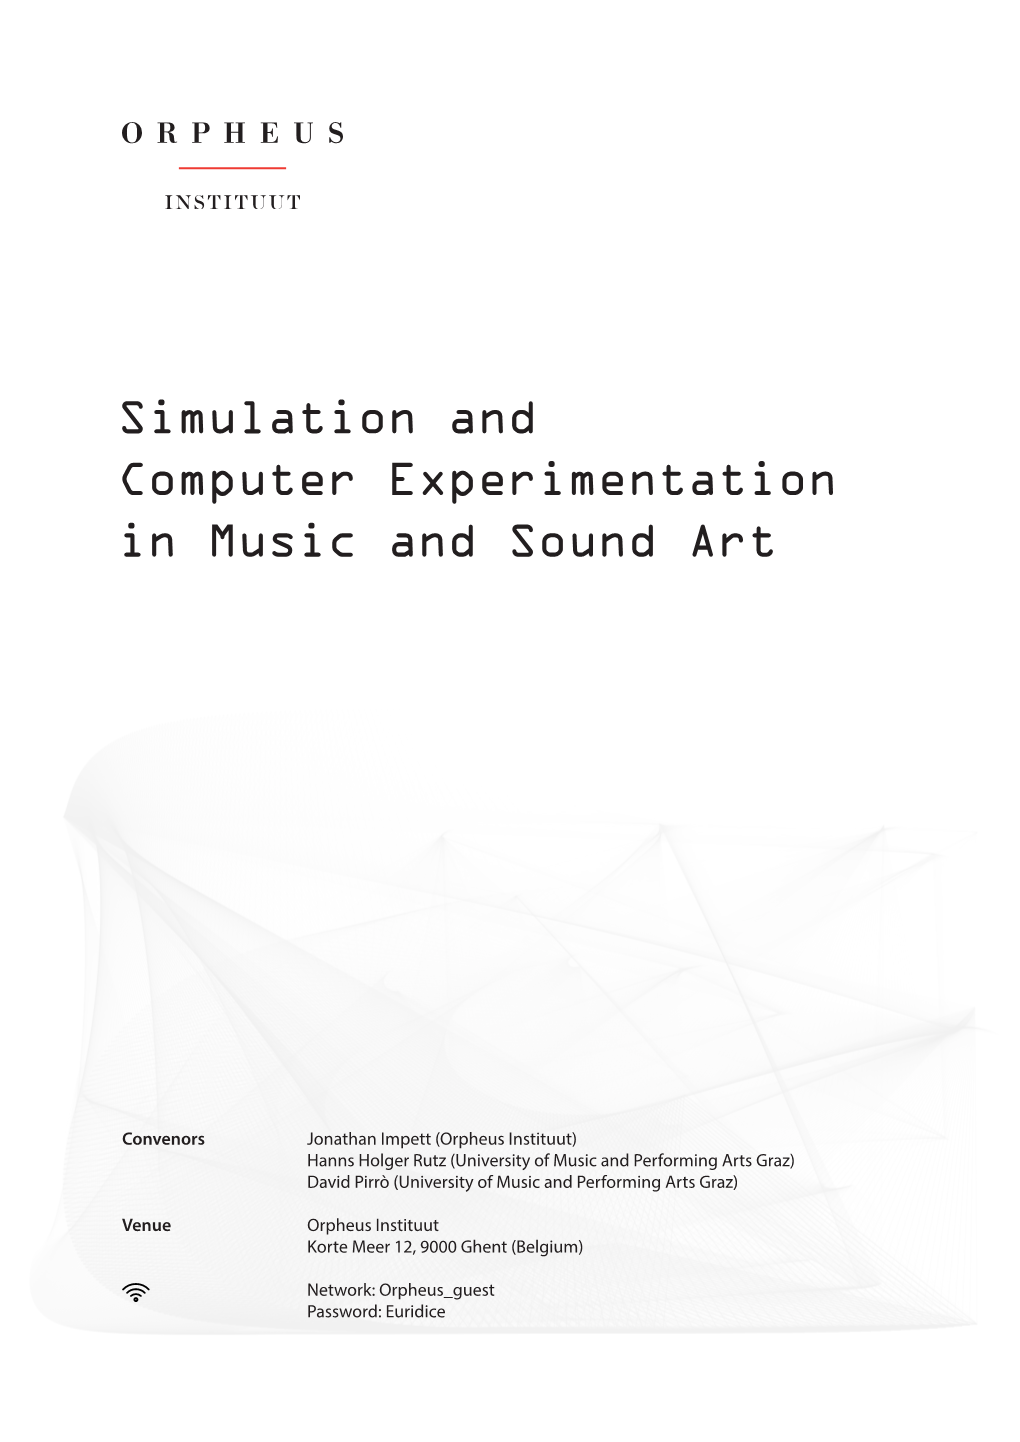 Simulation and Computer Experimentation in Music and Sound Art